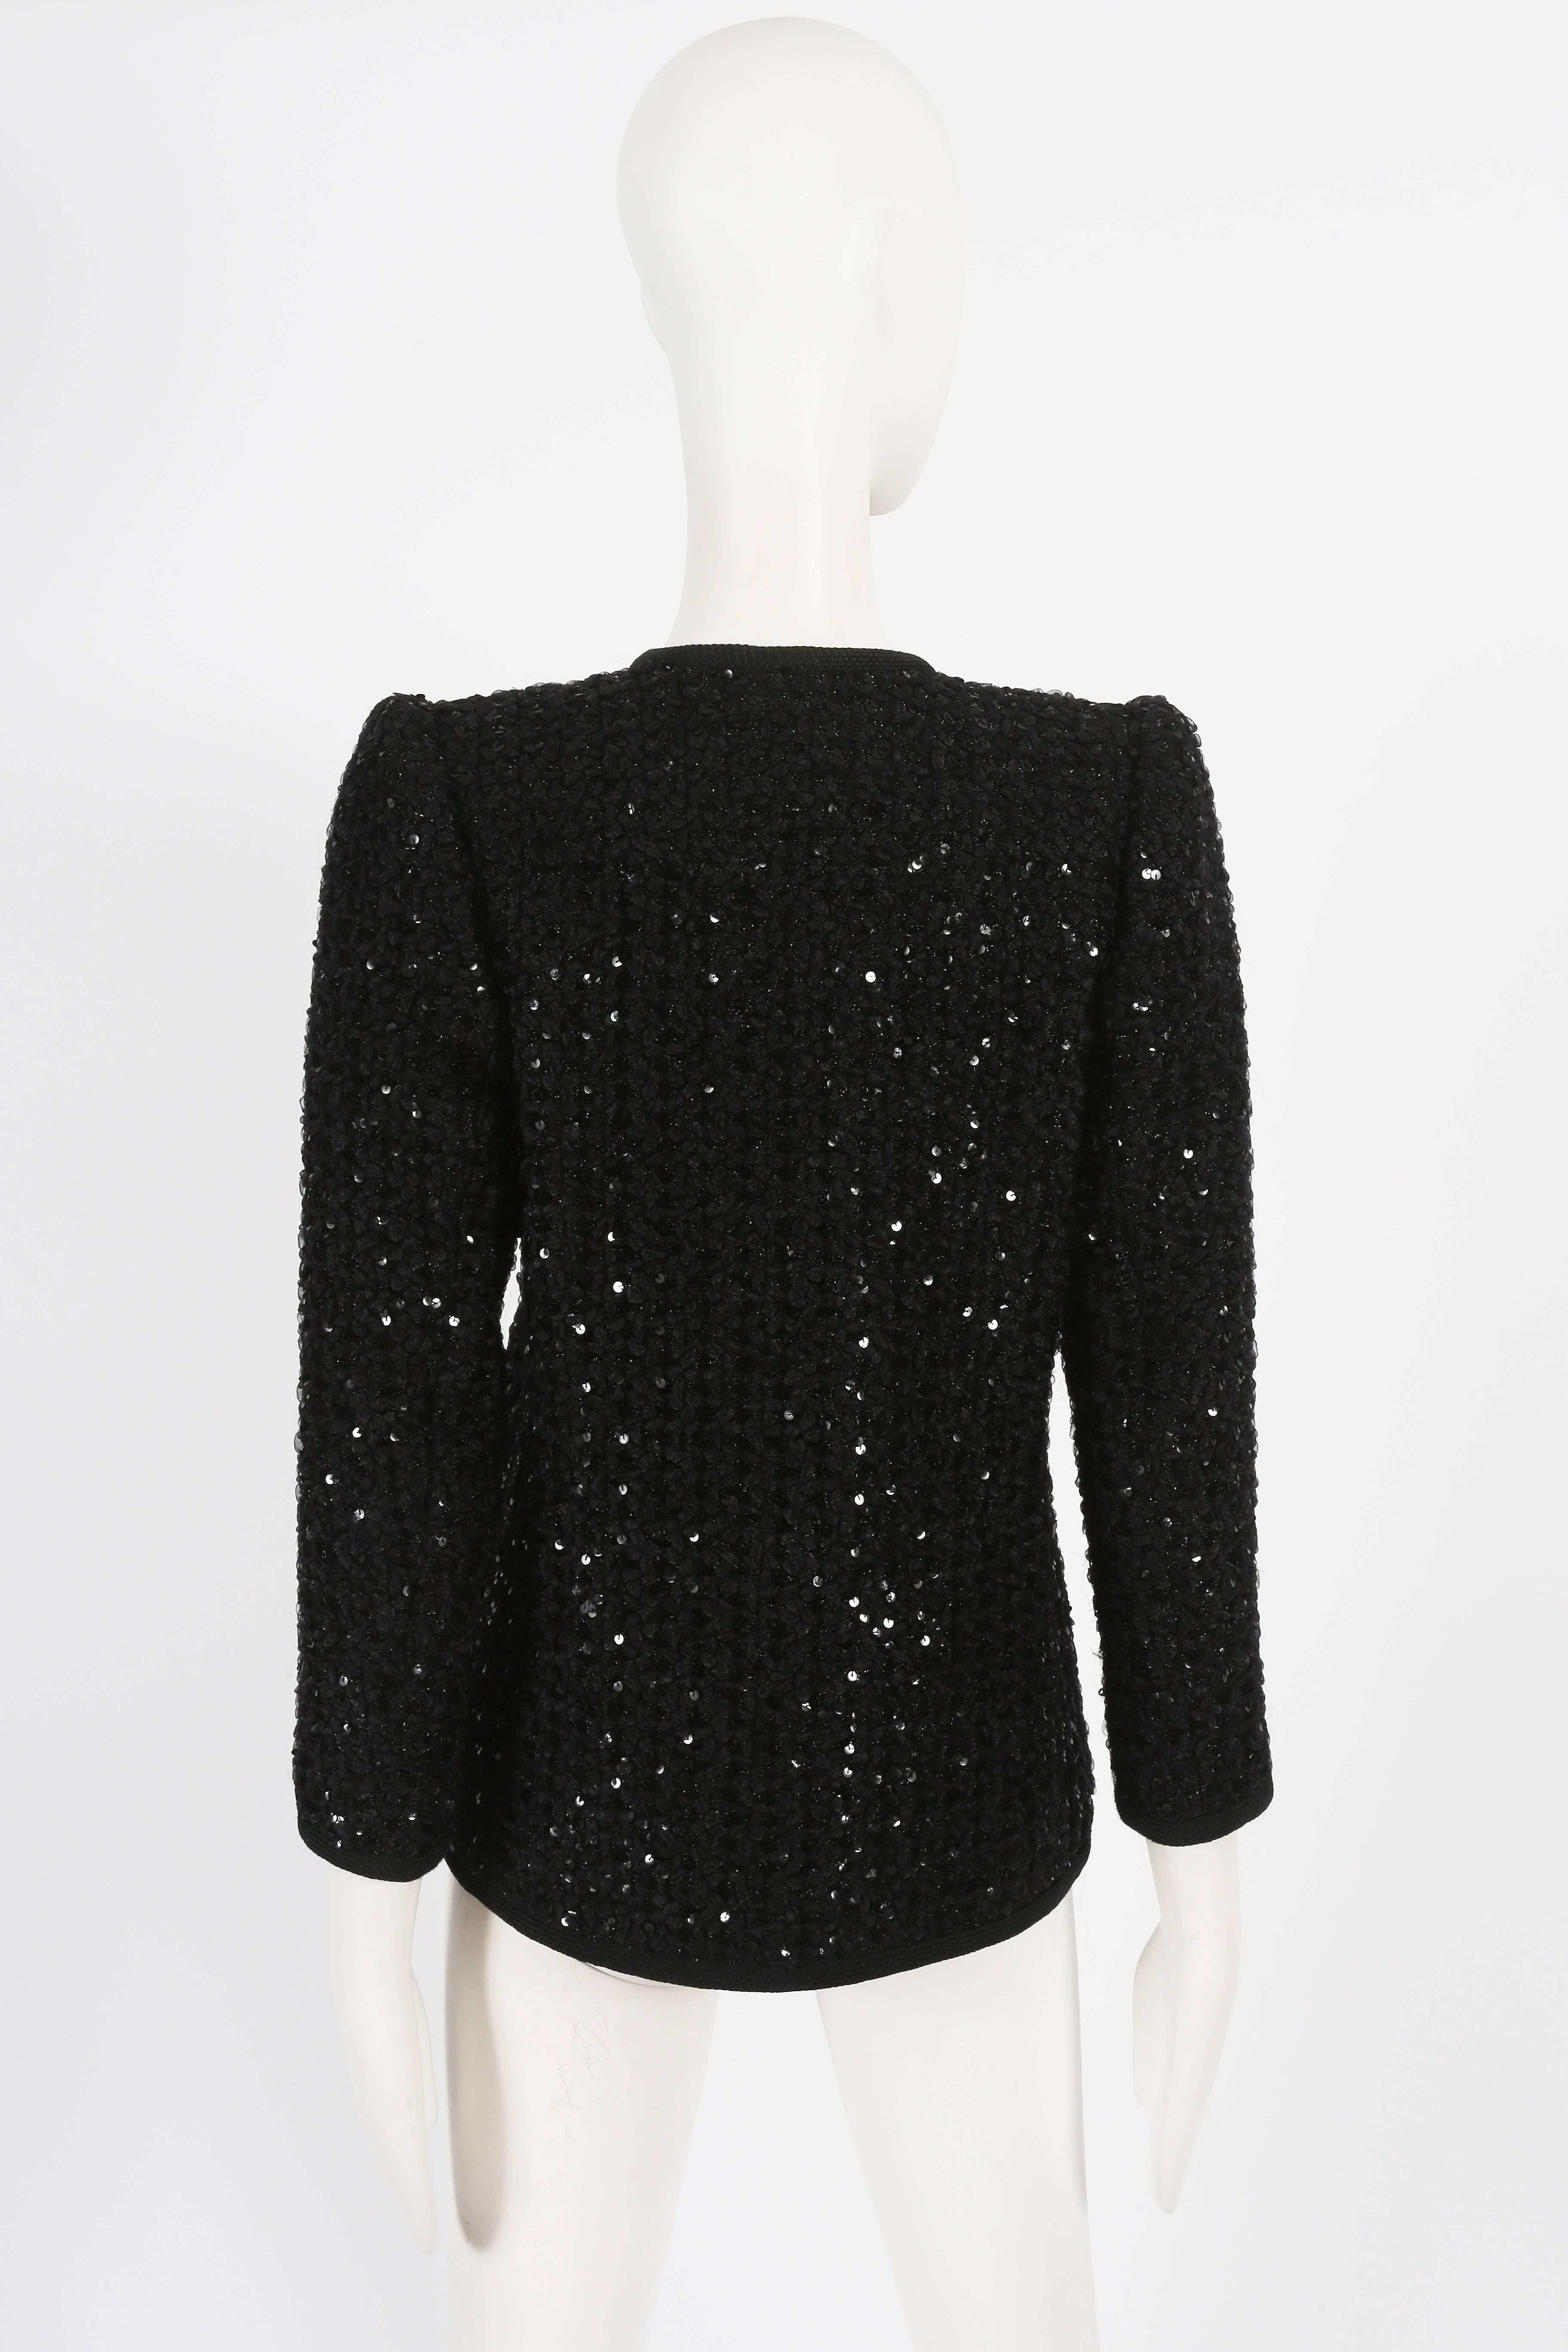 Yves Saint Laurent Haute Couture black sequinned evening jacket, fw 1978 In Good Condition For Sale In London, GB